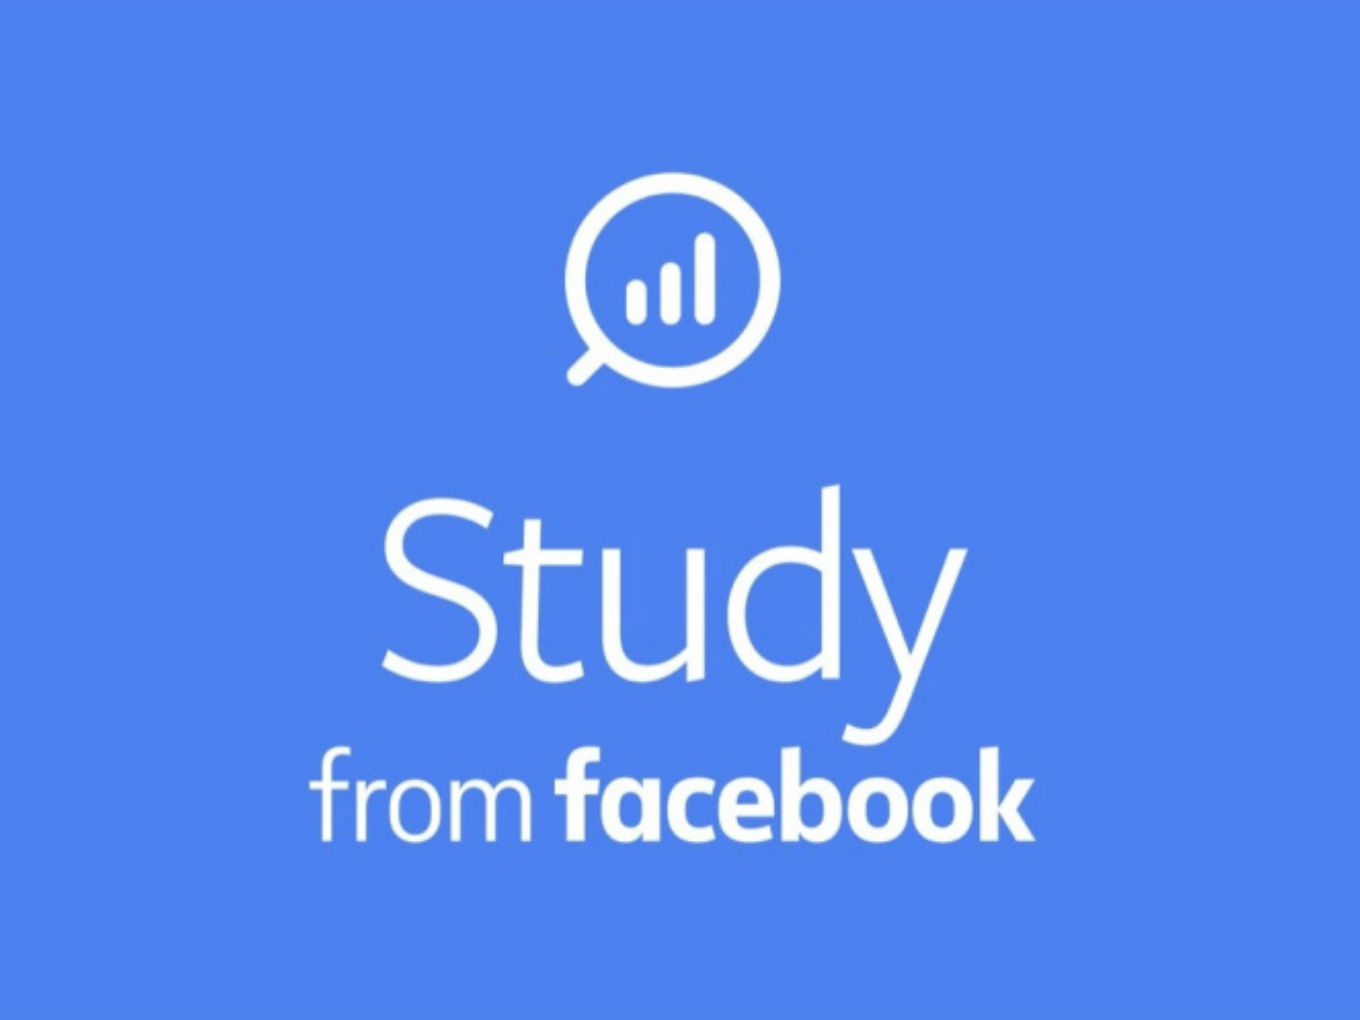 Facebook Starts Mobile App Market Research Programme For Users In India, US